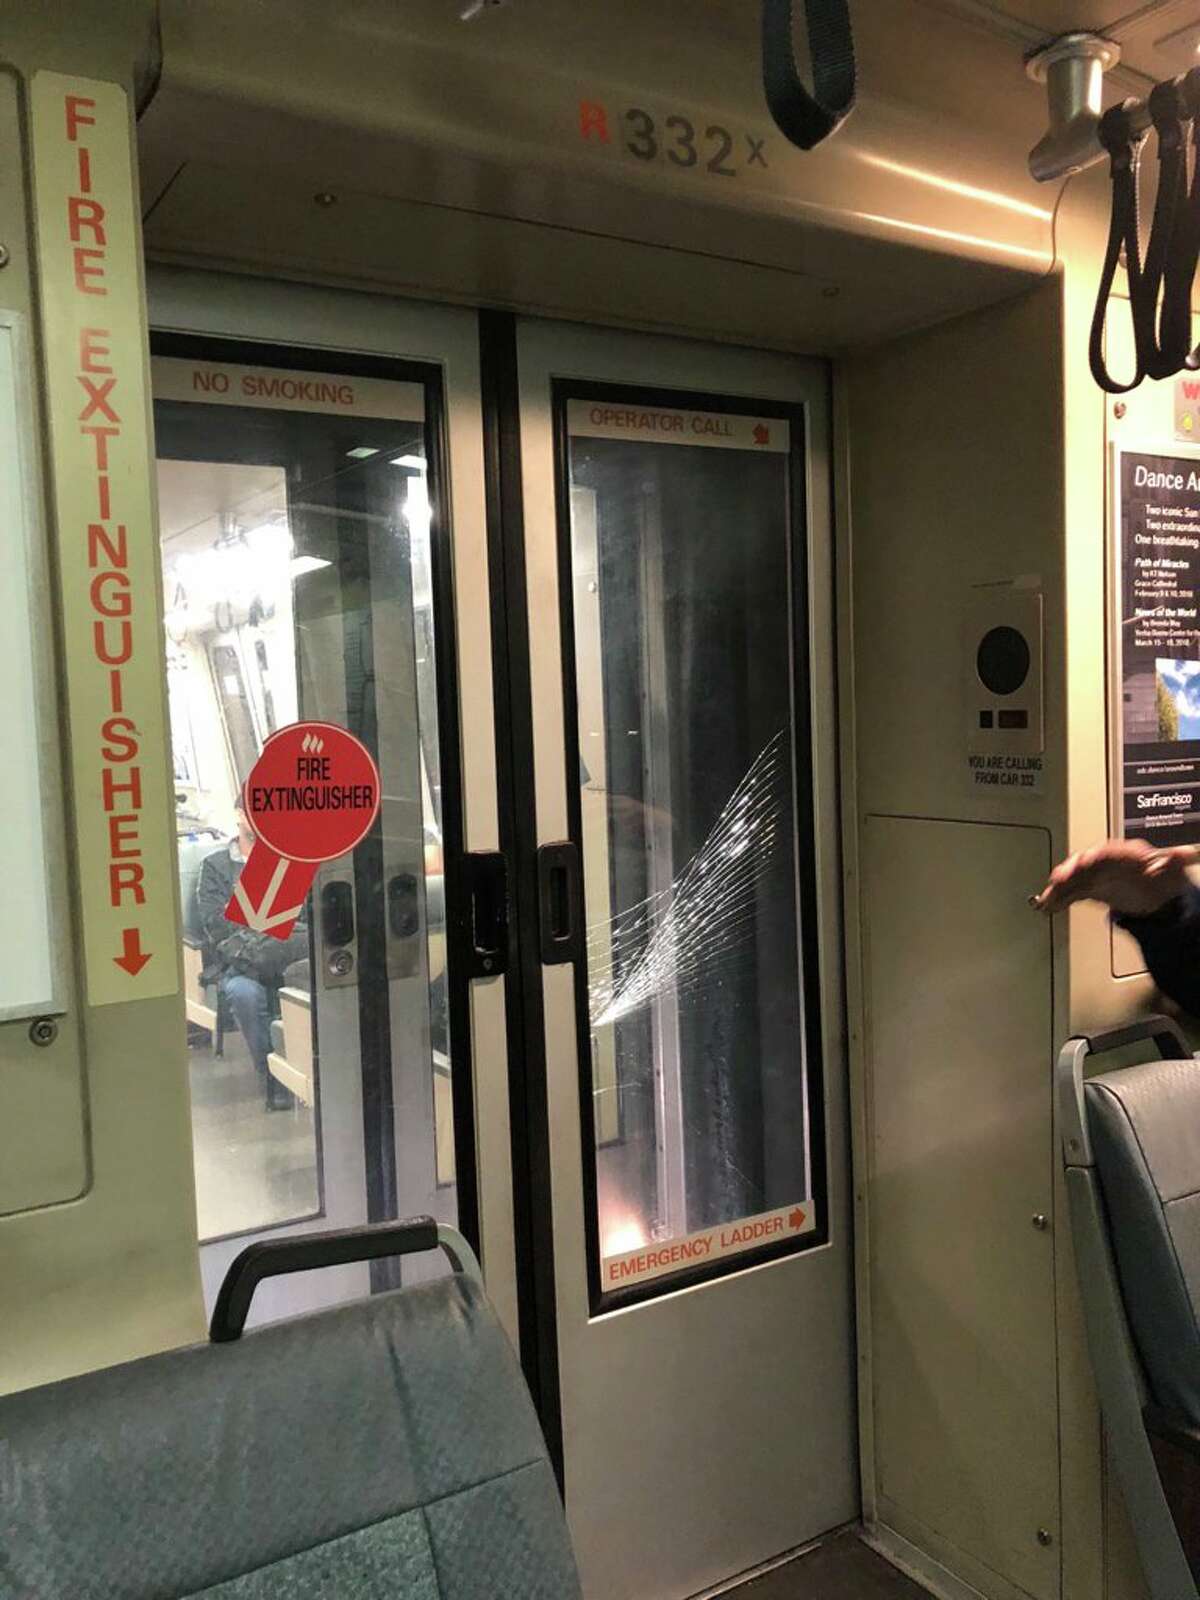 Cracked glass on a BART door after a would-be thief reportedly attempting to steal a passenger's phone resulted in a scuffle.